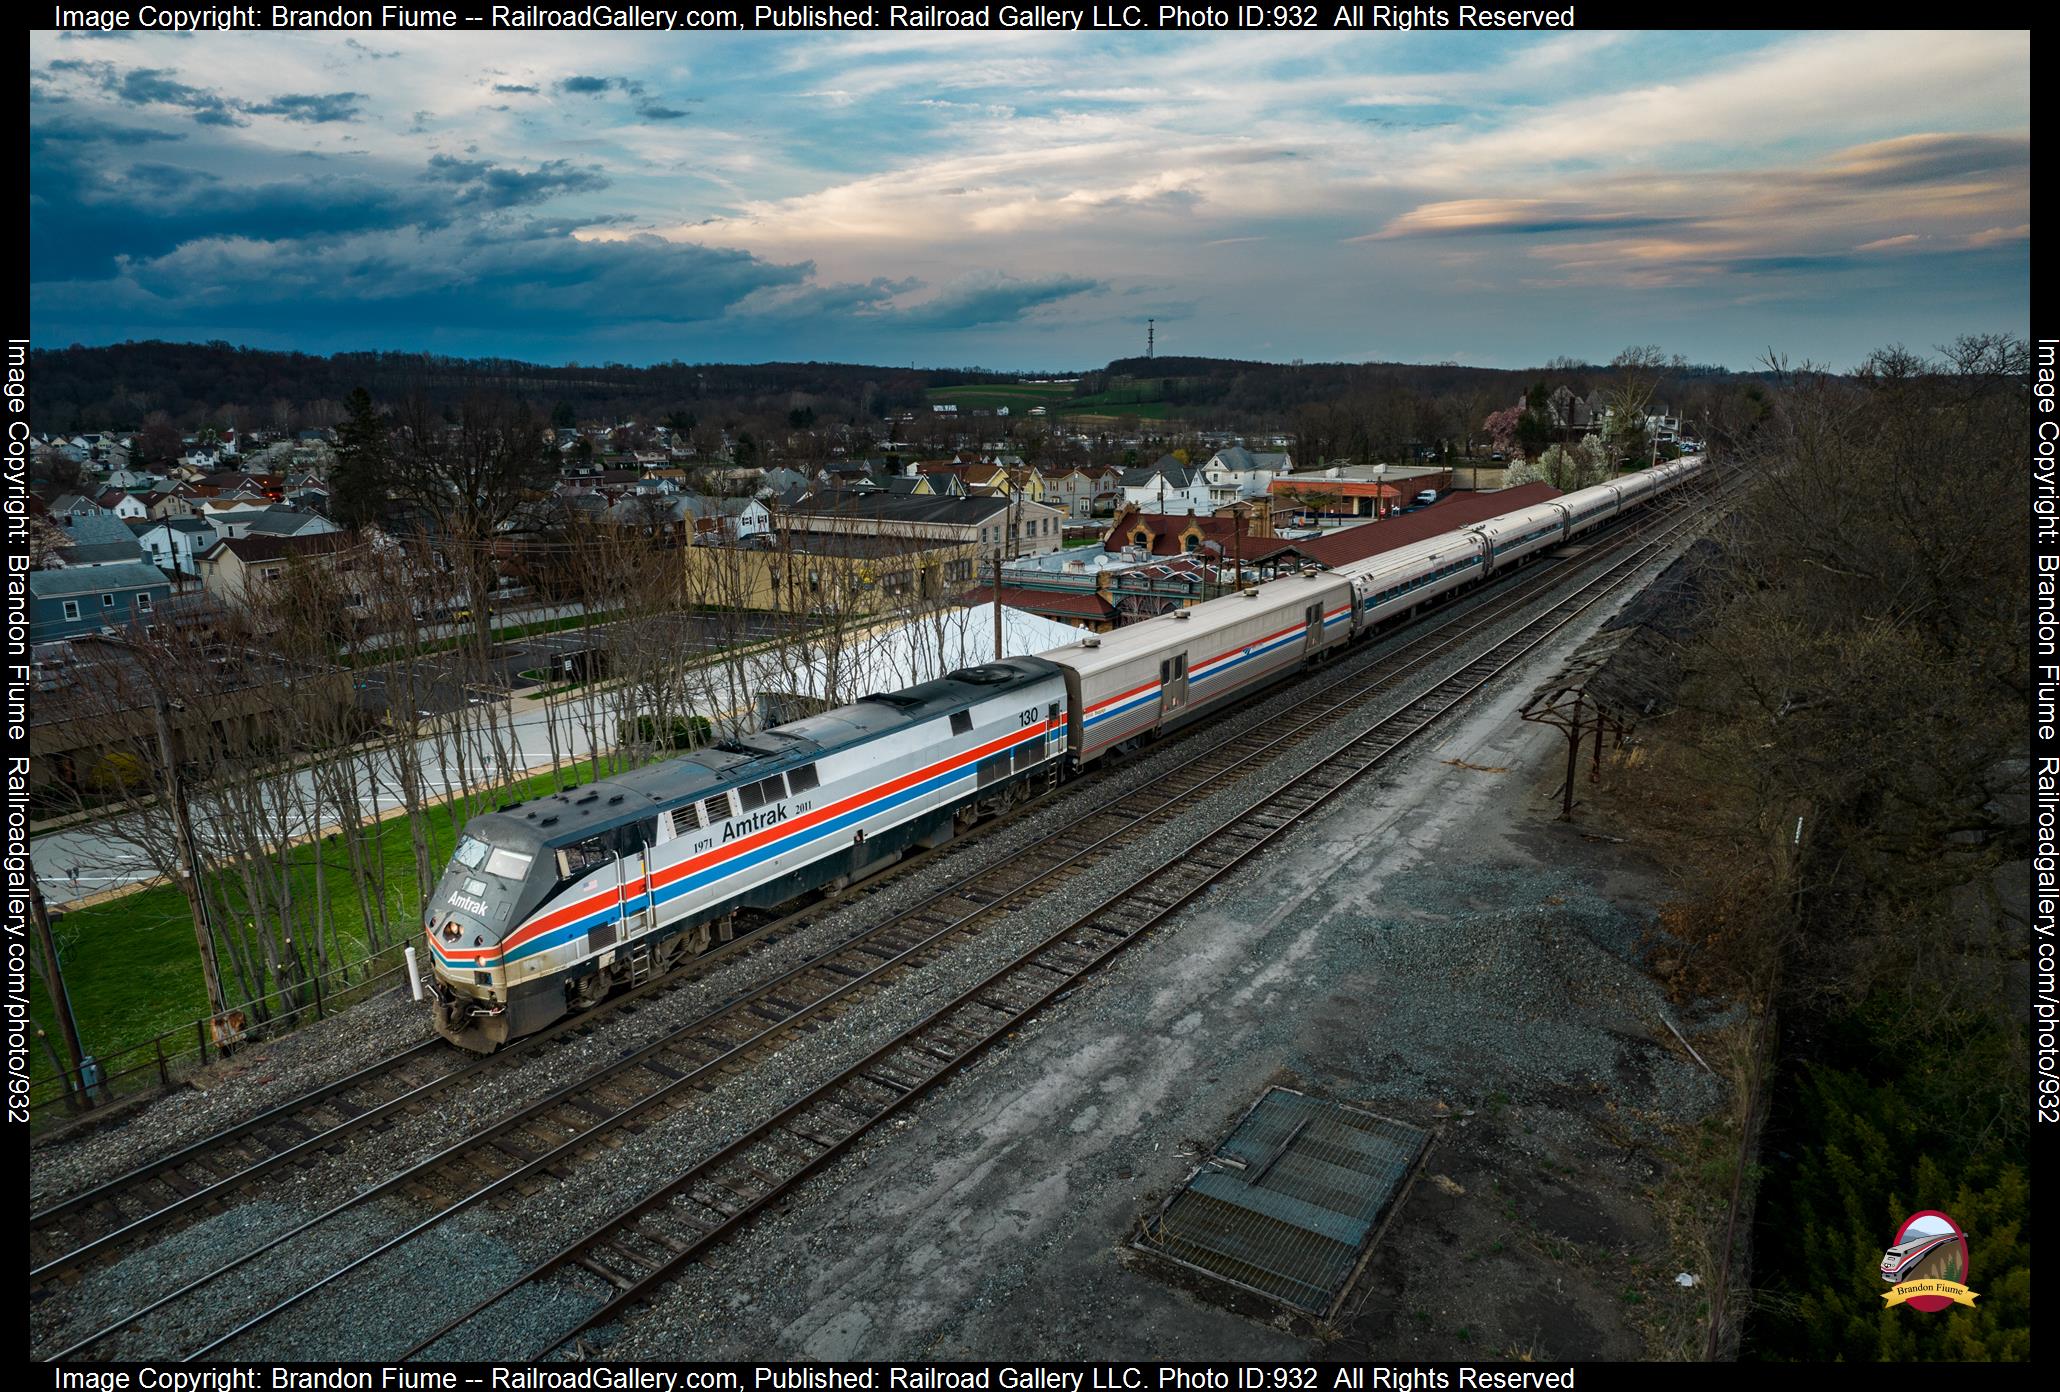 AMTK 130 is a class GE P42DC and  is pictured in Latrobe, Pennsylvania, USA.  This was taken along the Pittsburgh Line on the Amtrak. Photo Copyright: Brandon Fiume uploaded to Railroad Gallery on 04/07/2023. This photograph of AMTK 130 was taken on Wednesday, April 05, 2023. All Rights Reserved. 